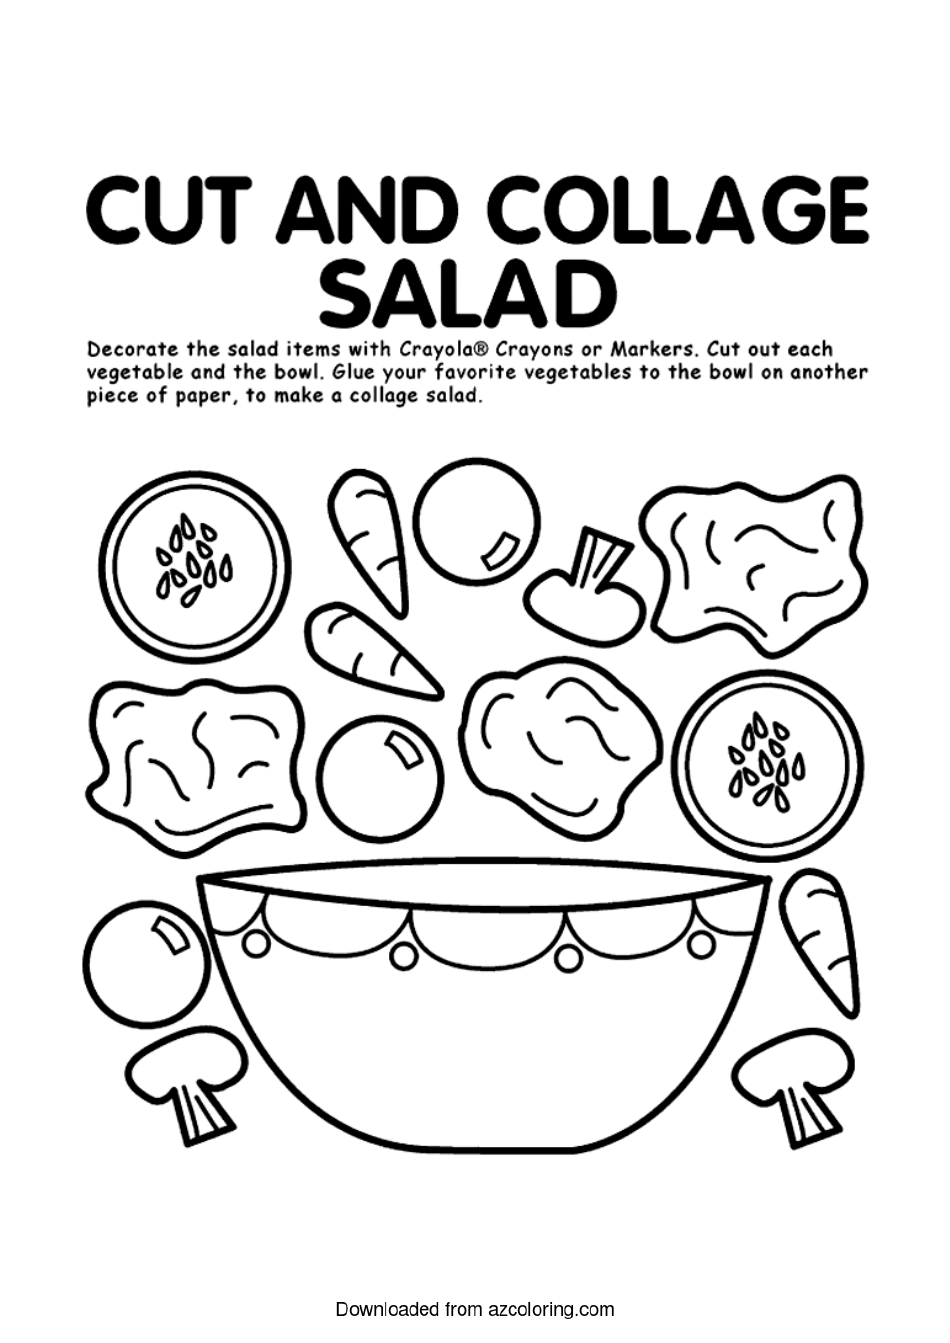 Coloring sheet of a Salad Collage with various veggies and ingredients